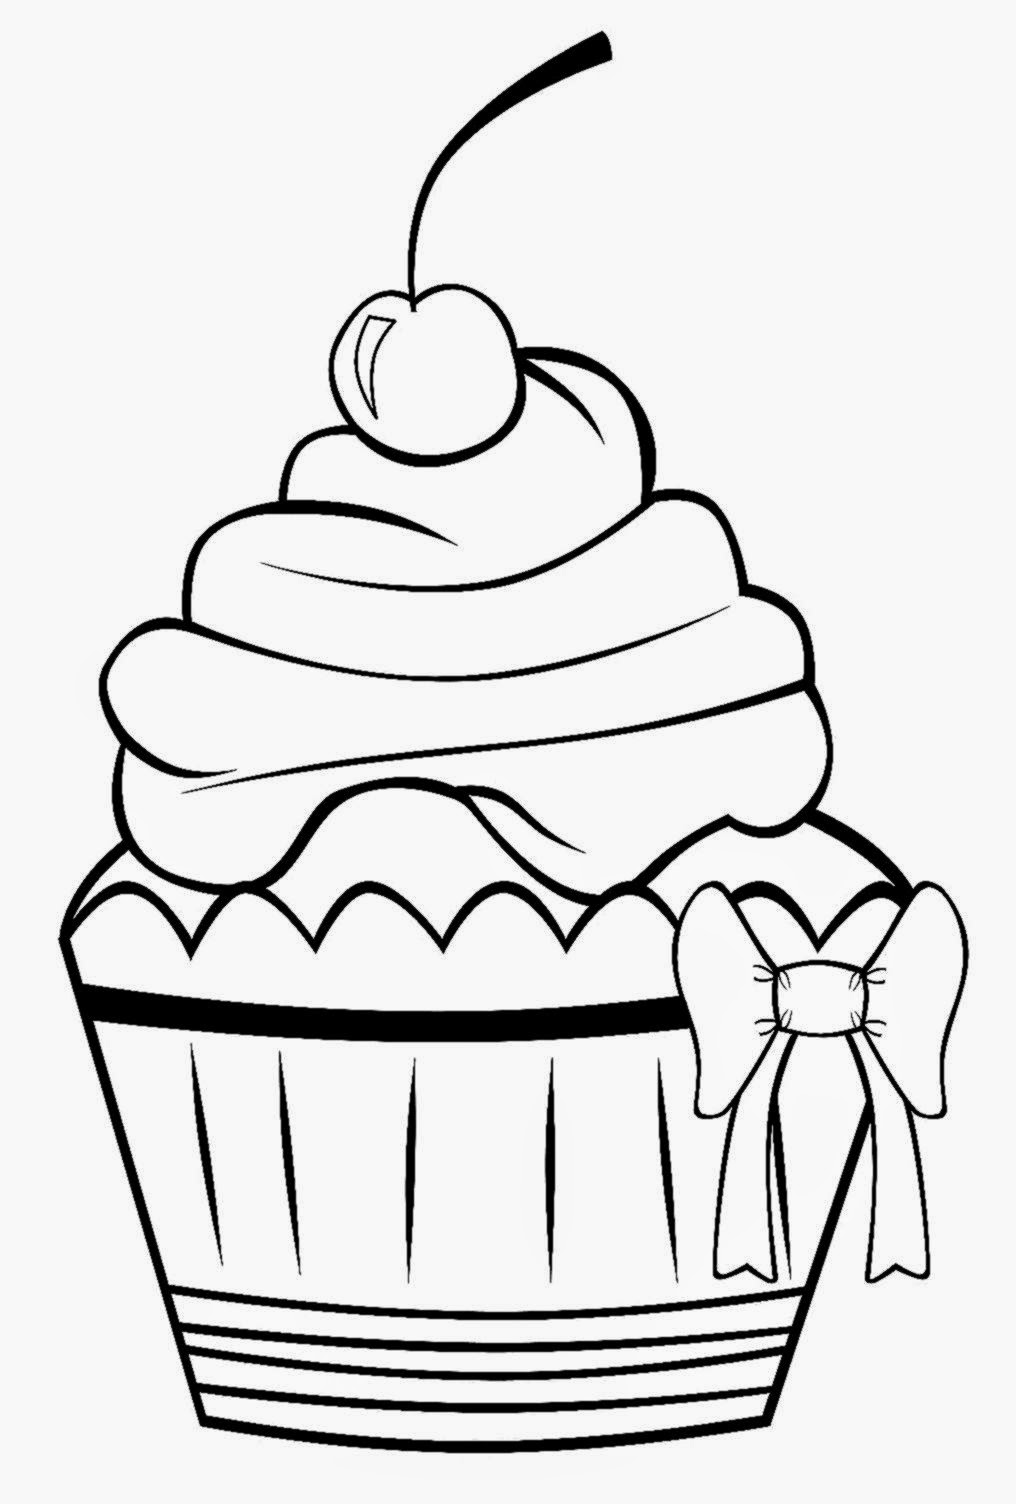 Cupcake Coloring Book | Free Coloring Pages